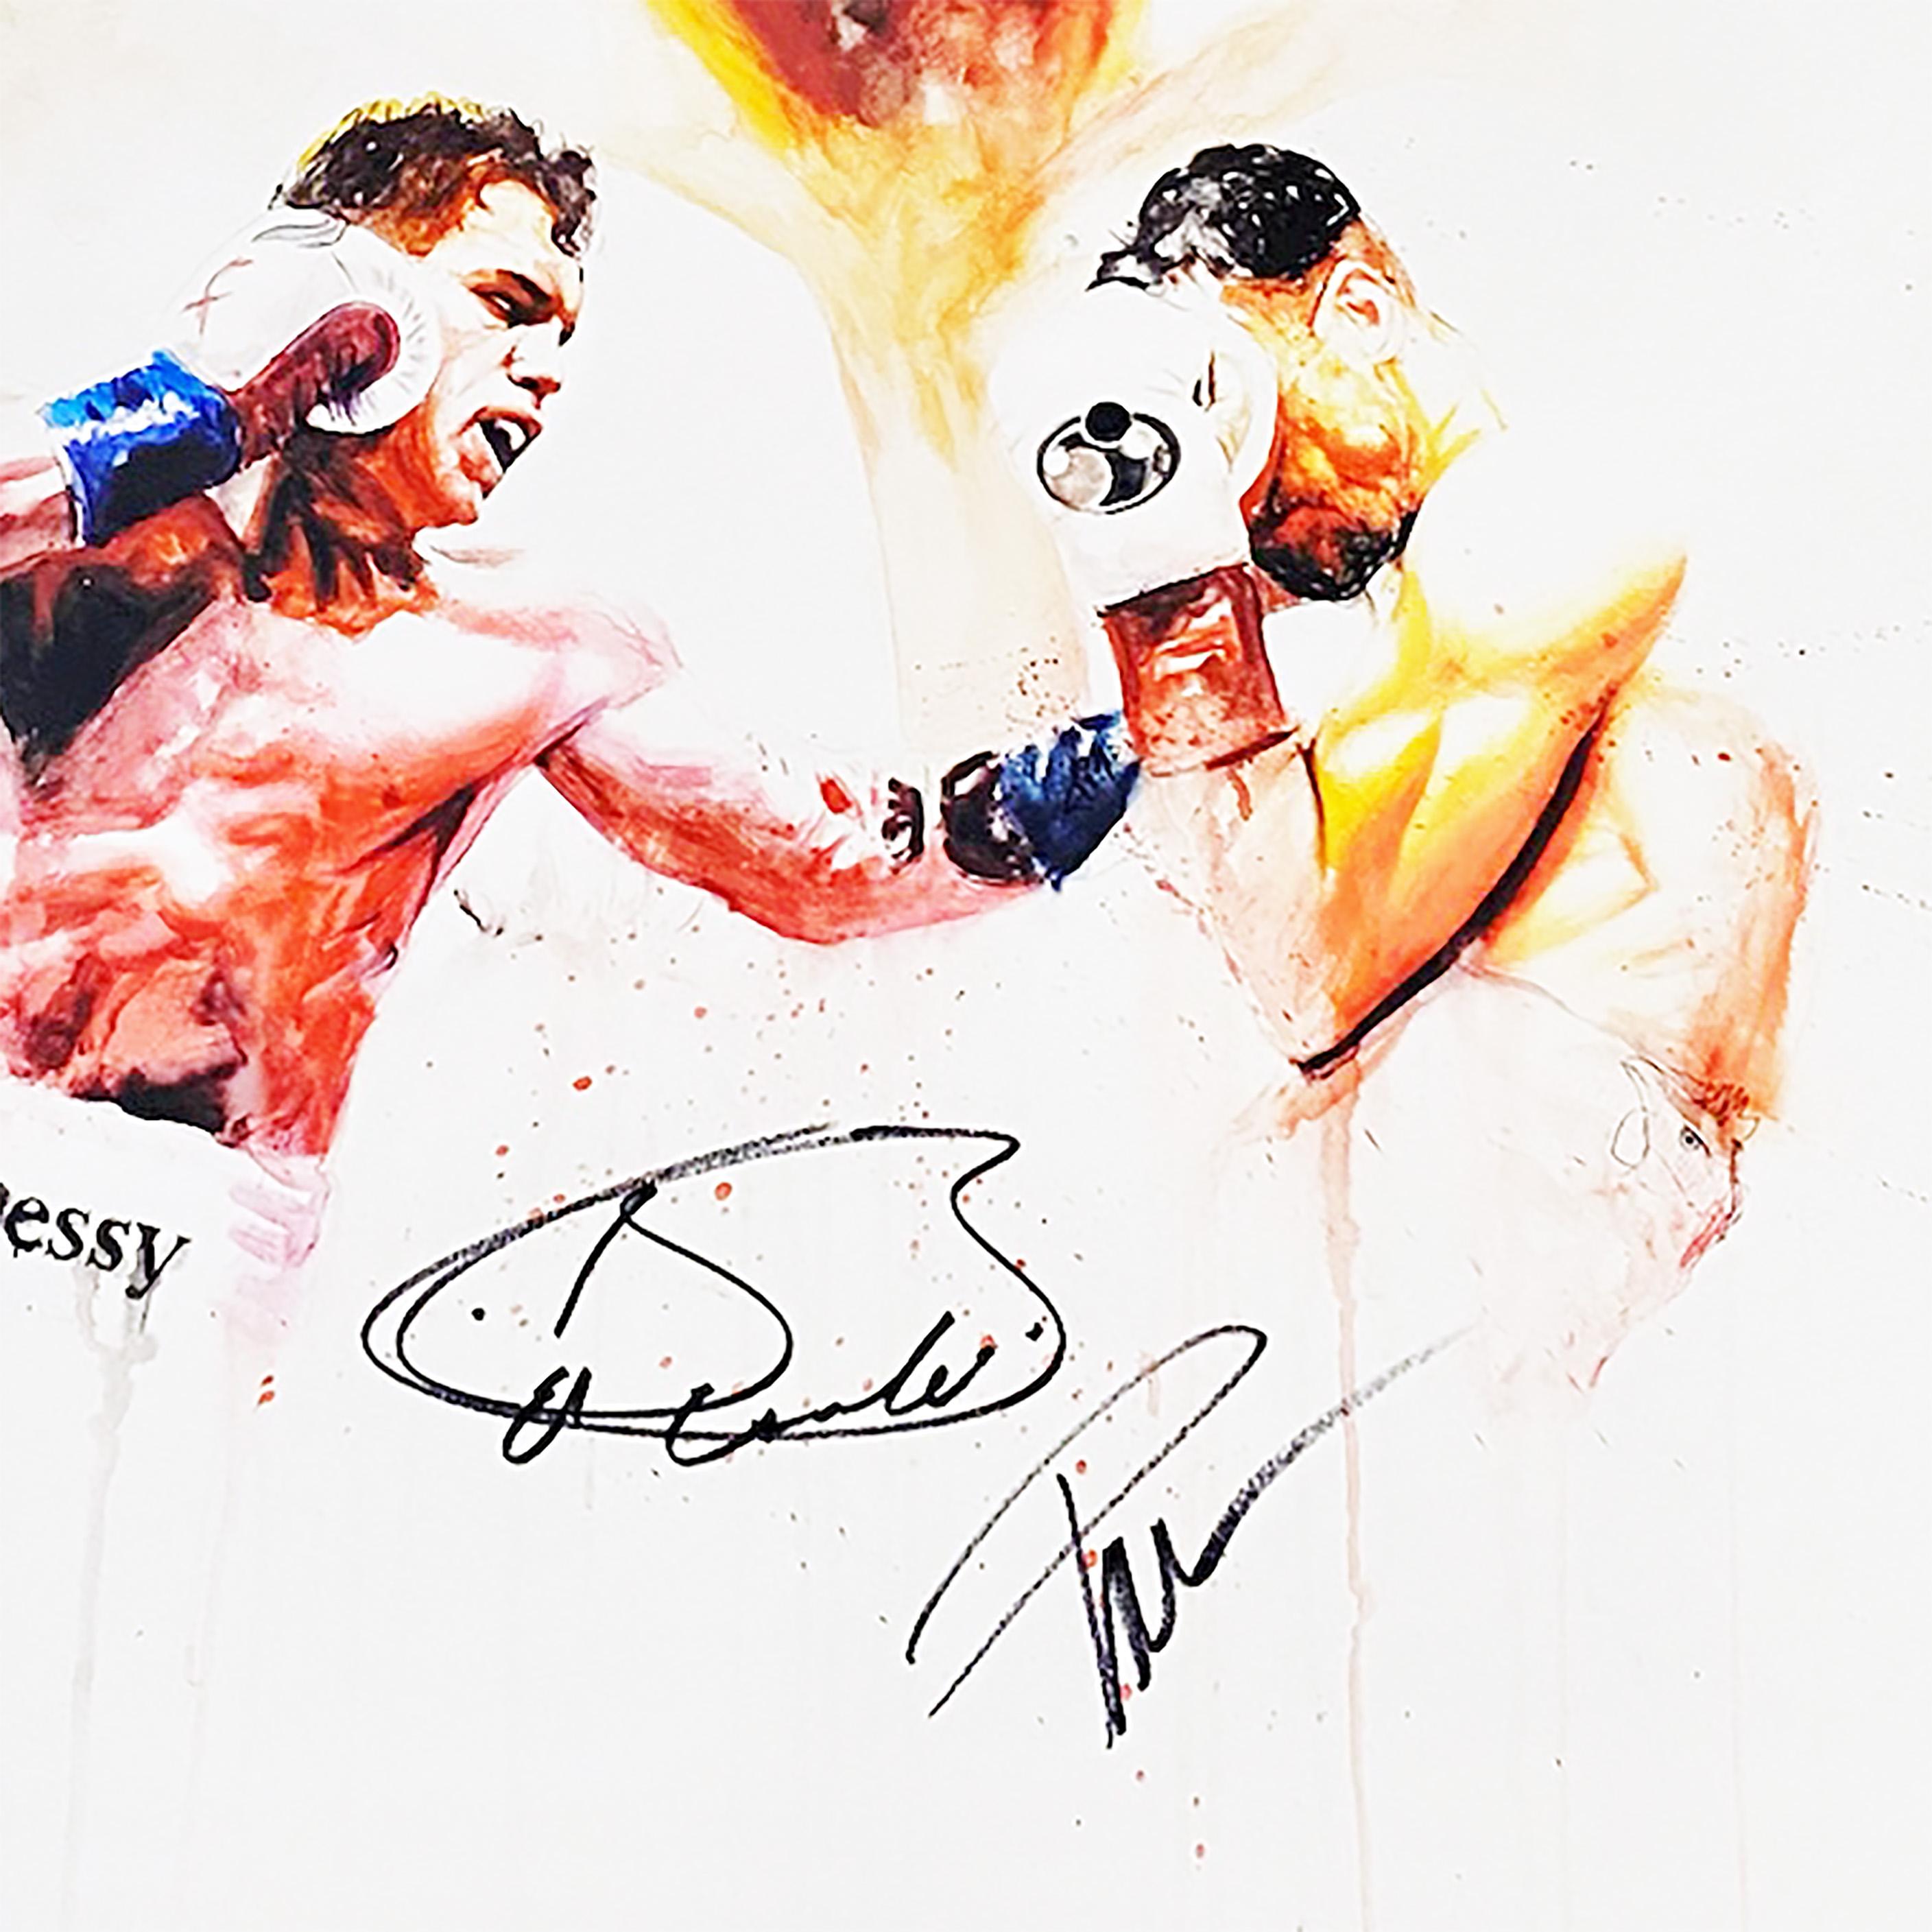 Canelo Alvarez signed giclée prints on canvas. For the most discerning collector, we are offering a select number of hand-embellished prints. These embellishments transform the limited-edition prints into original works of art featuring Canelo’s “No